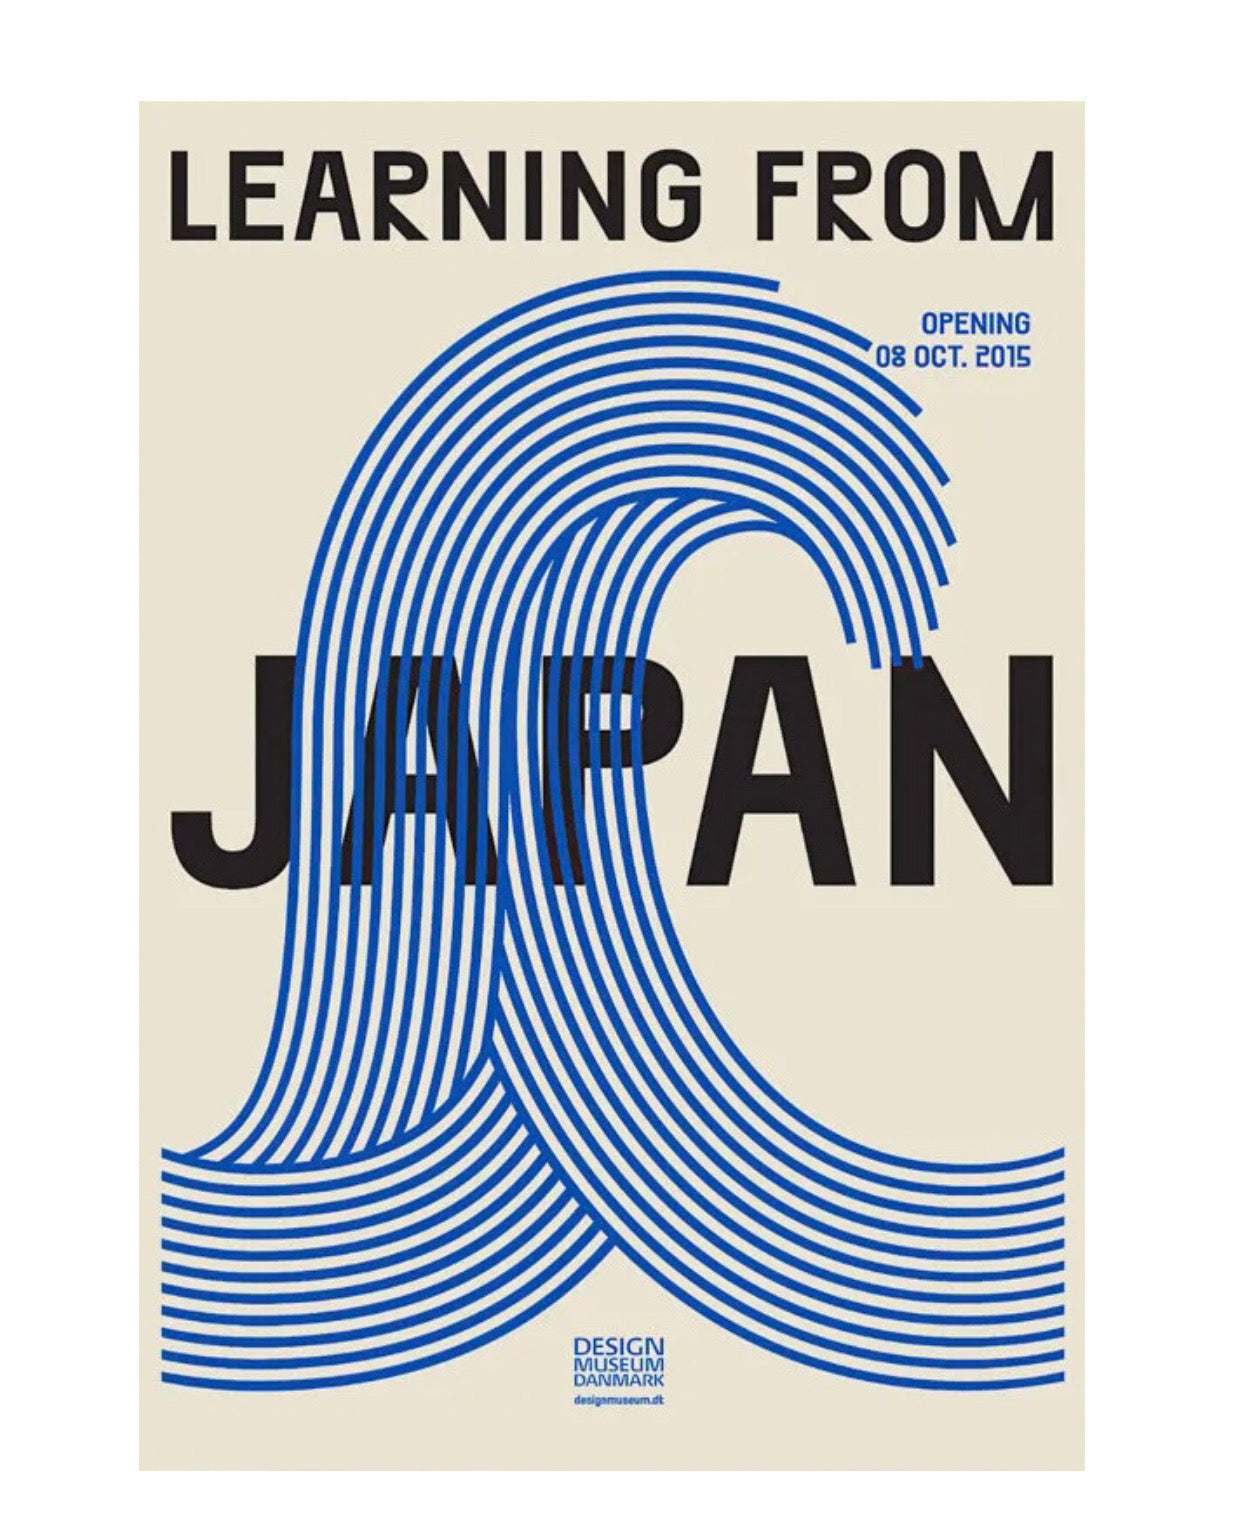 learning from japan poster